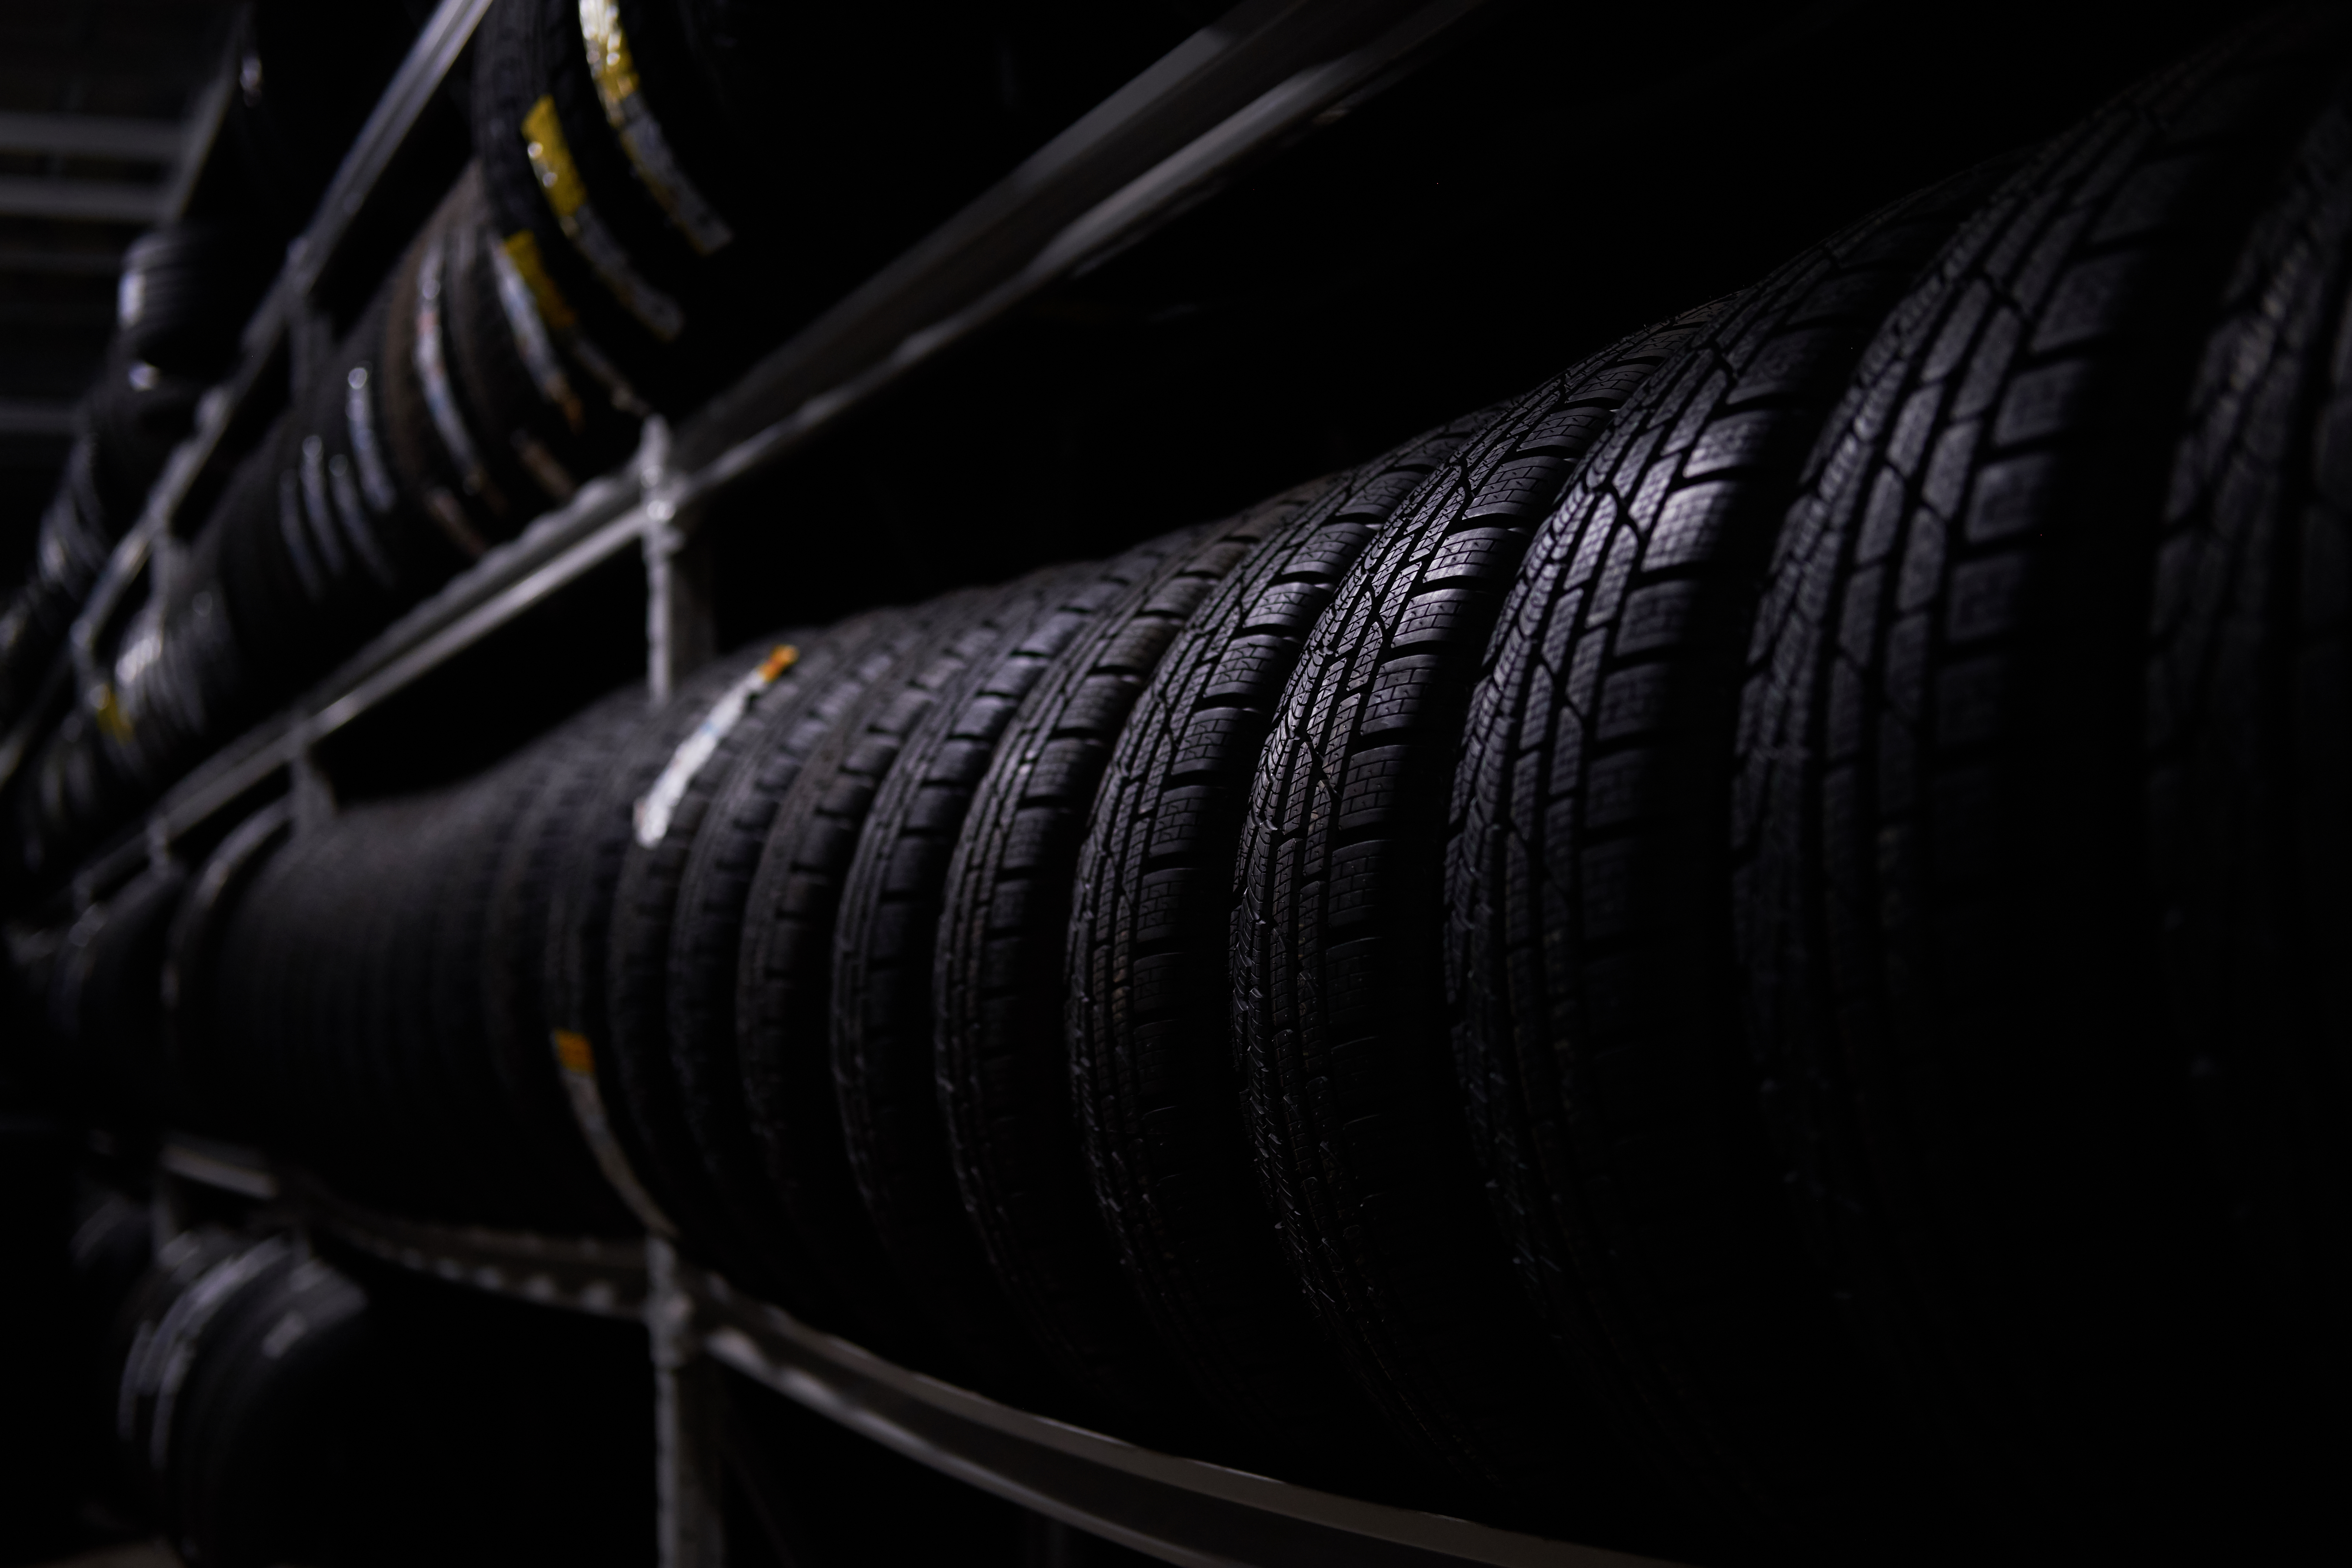 Impact on EUs tyre manufacturers and rubber industry